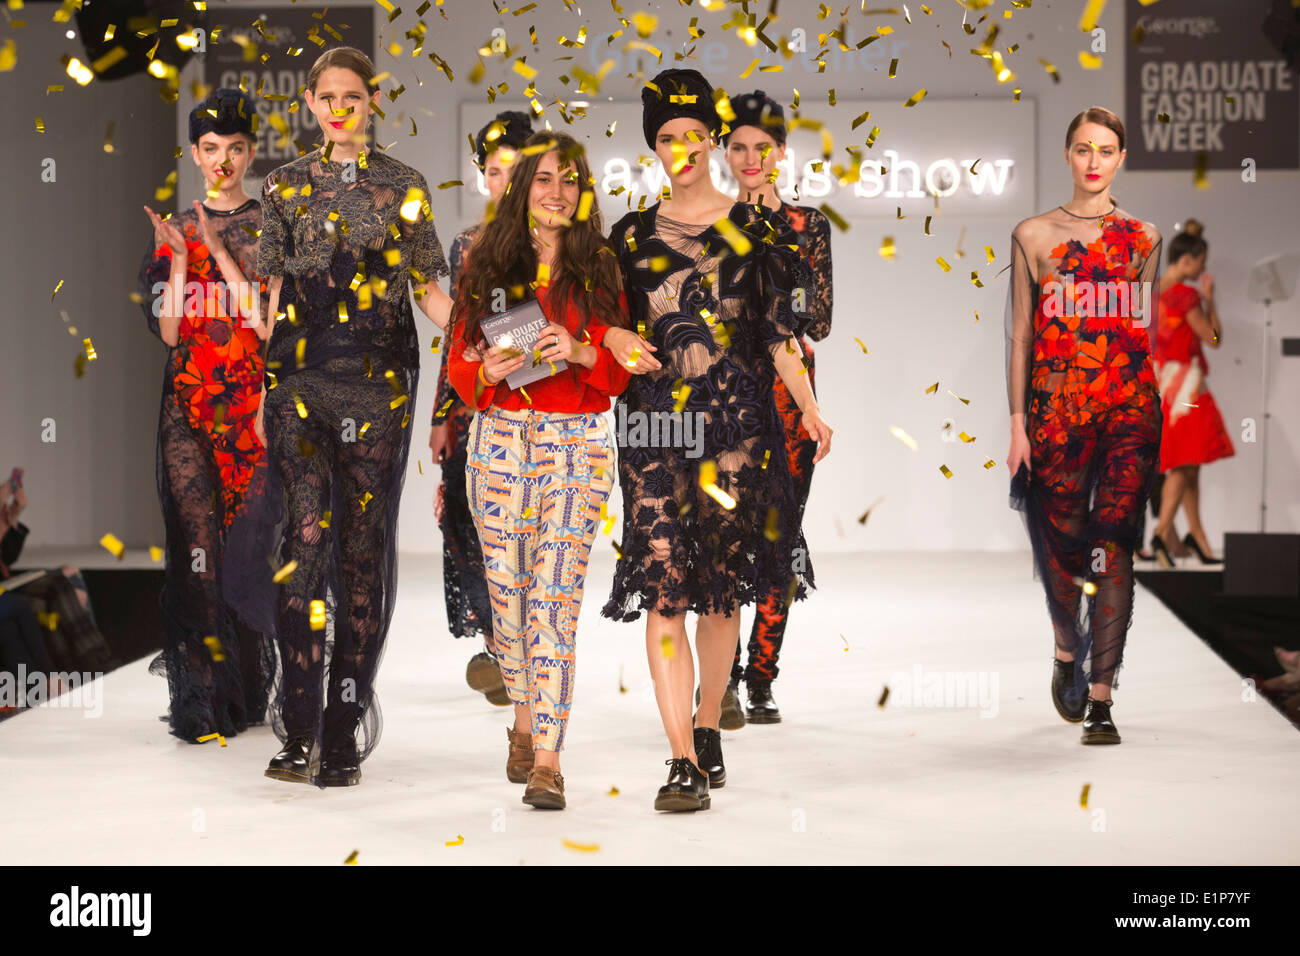 George Gold Award Winner Grace Weller with her collection at Graduate Fashion Week 2014 Stock Photo